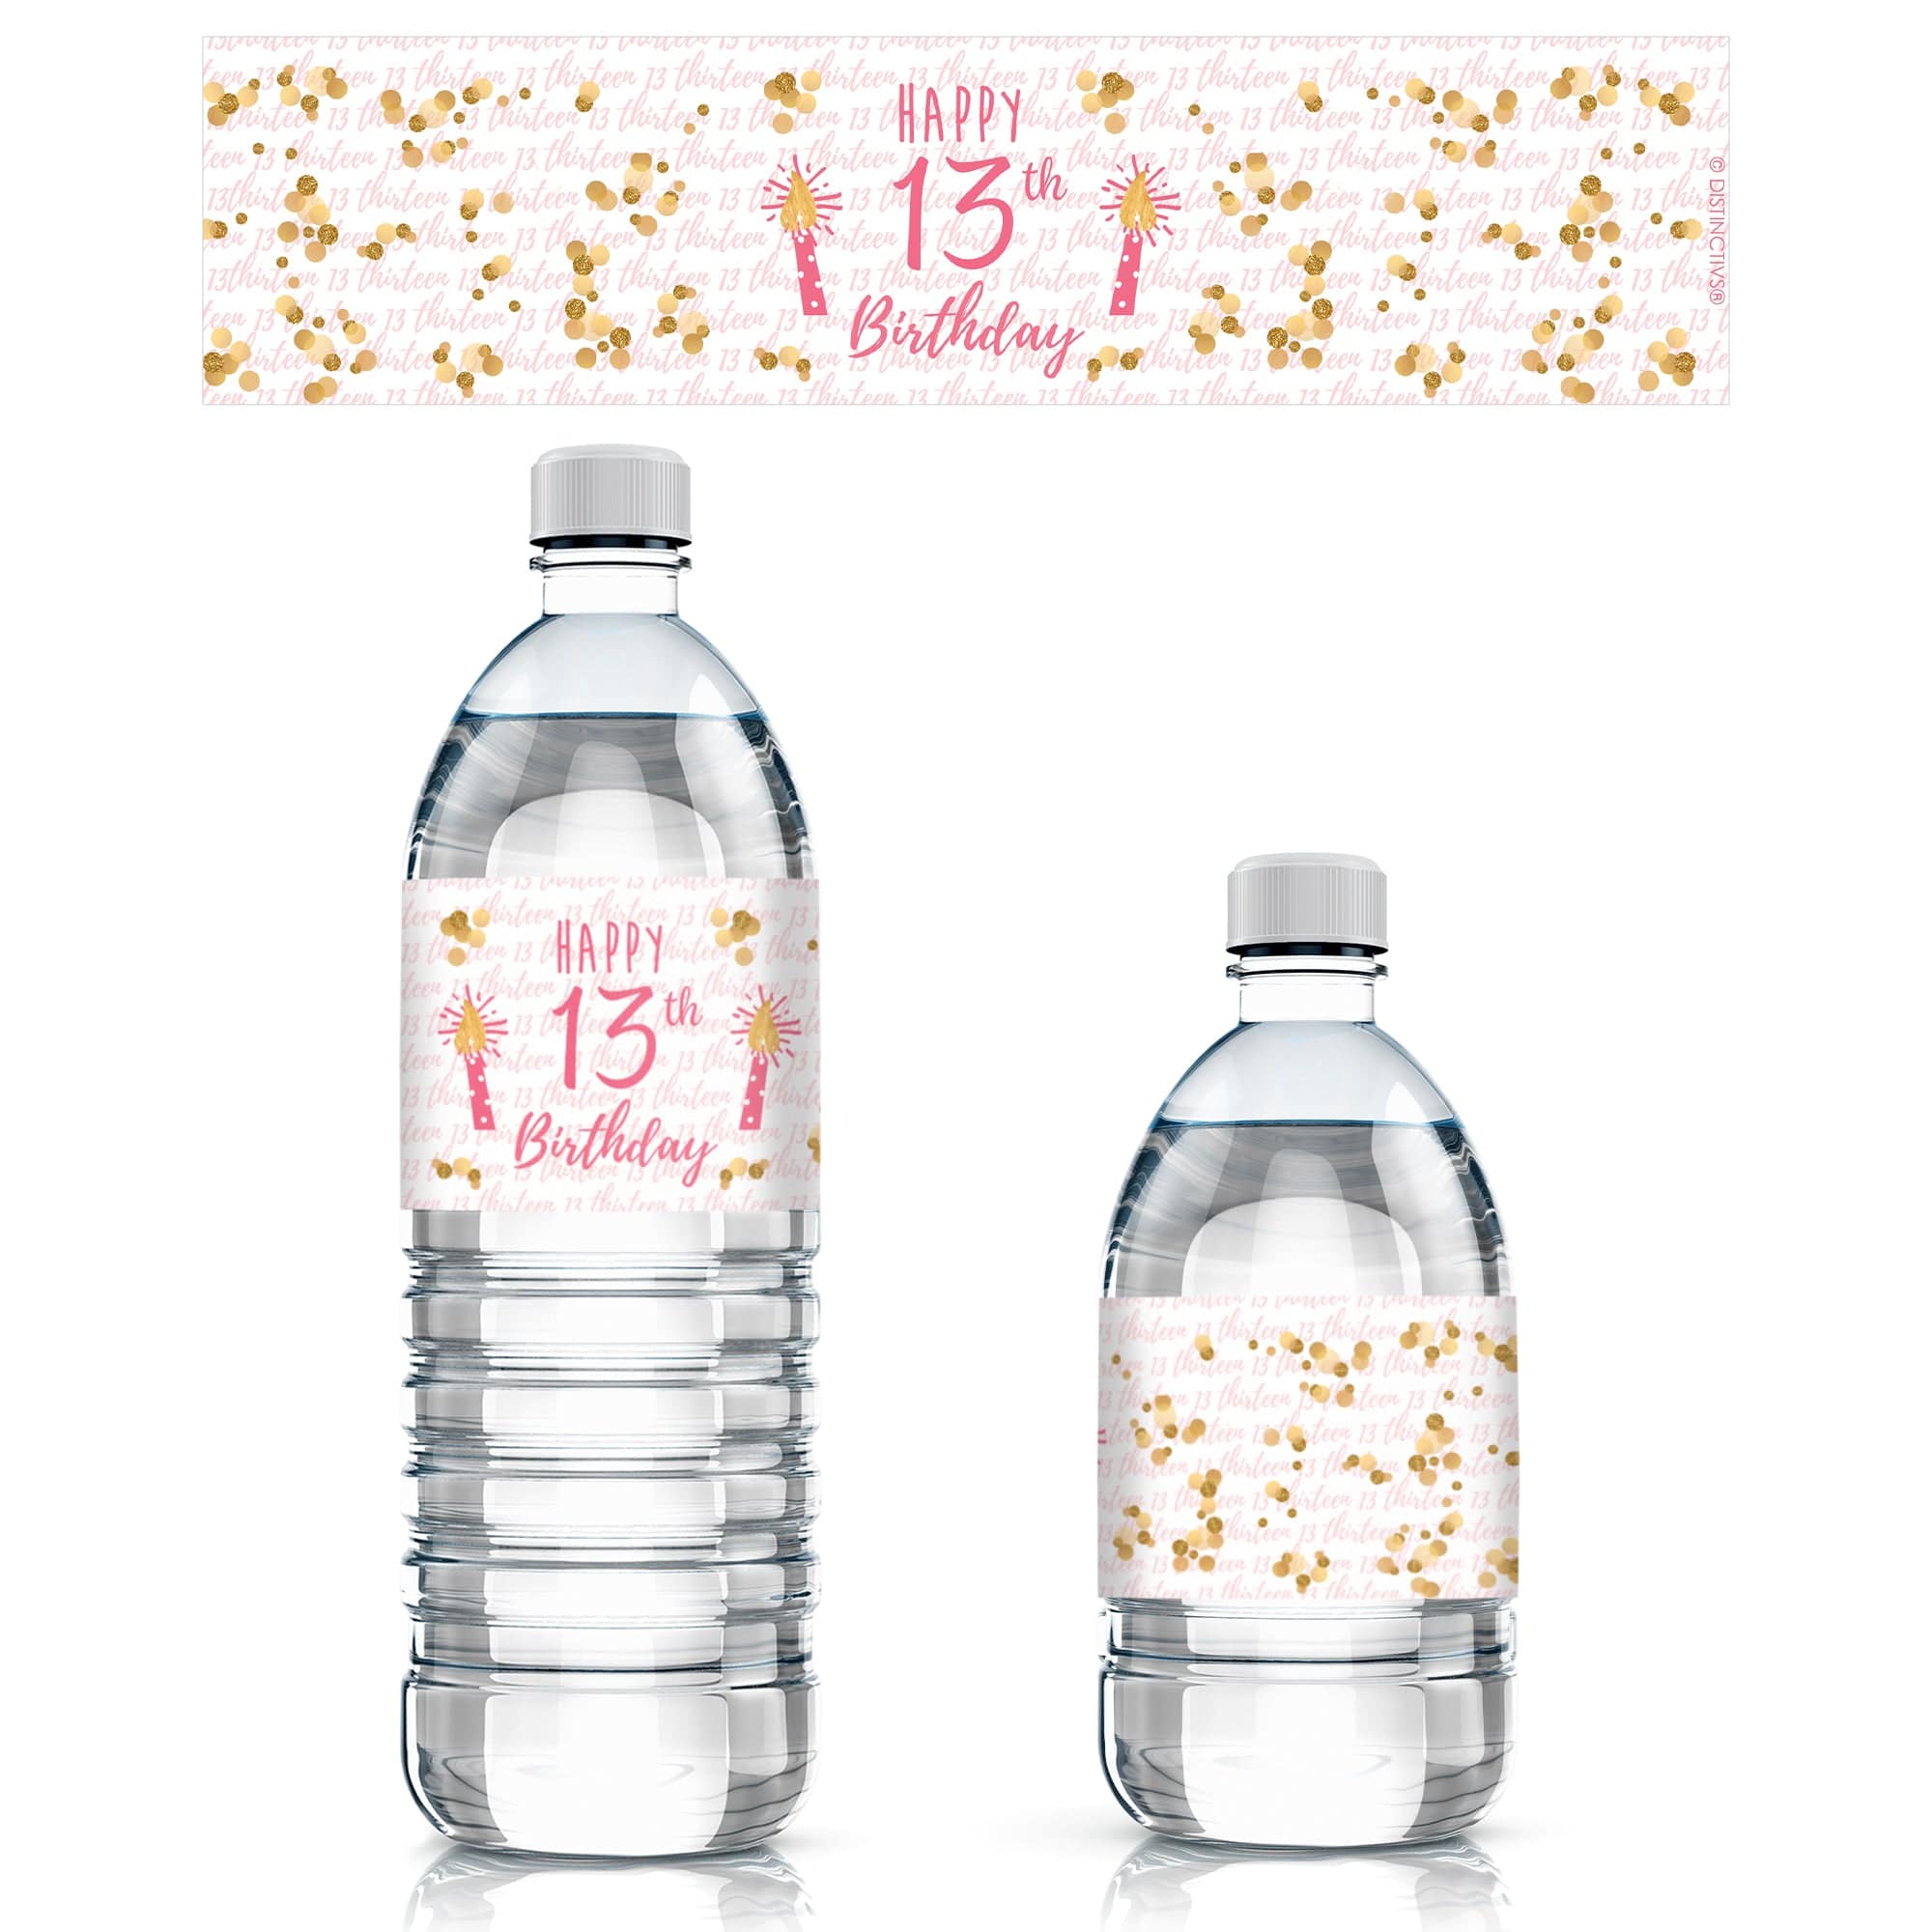 https://cdn.shopify.com/s/files/1/0734/7909/products/pink-and-gold-13th-birthday-party-water-bottle-labels-24-count-32496907255979.jpg?v=1660276493&width=370%20370w